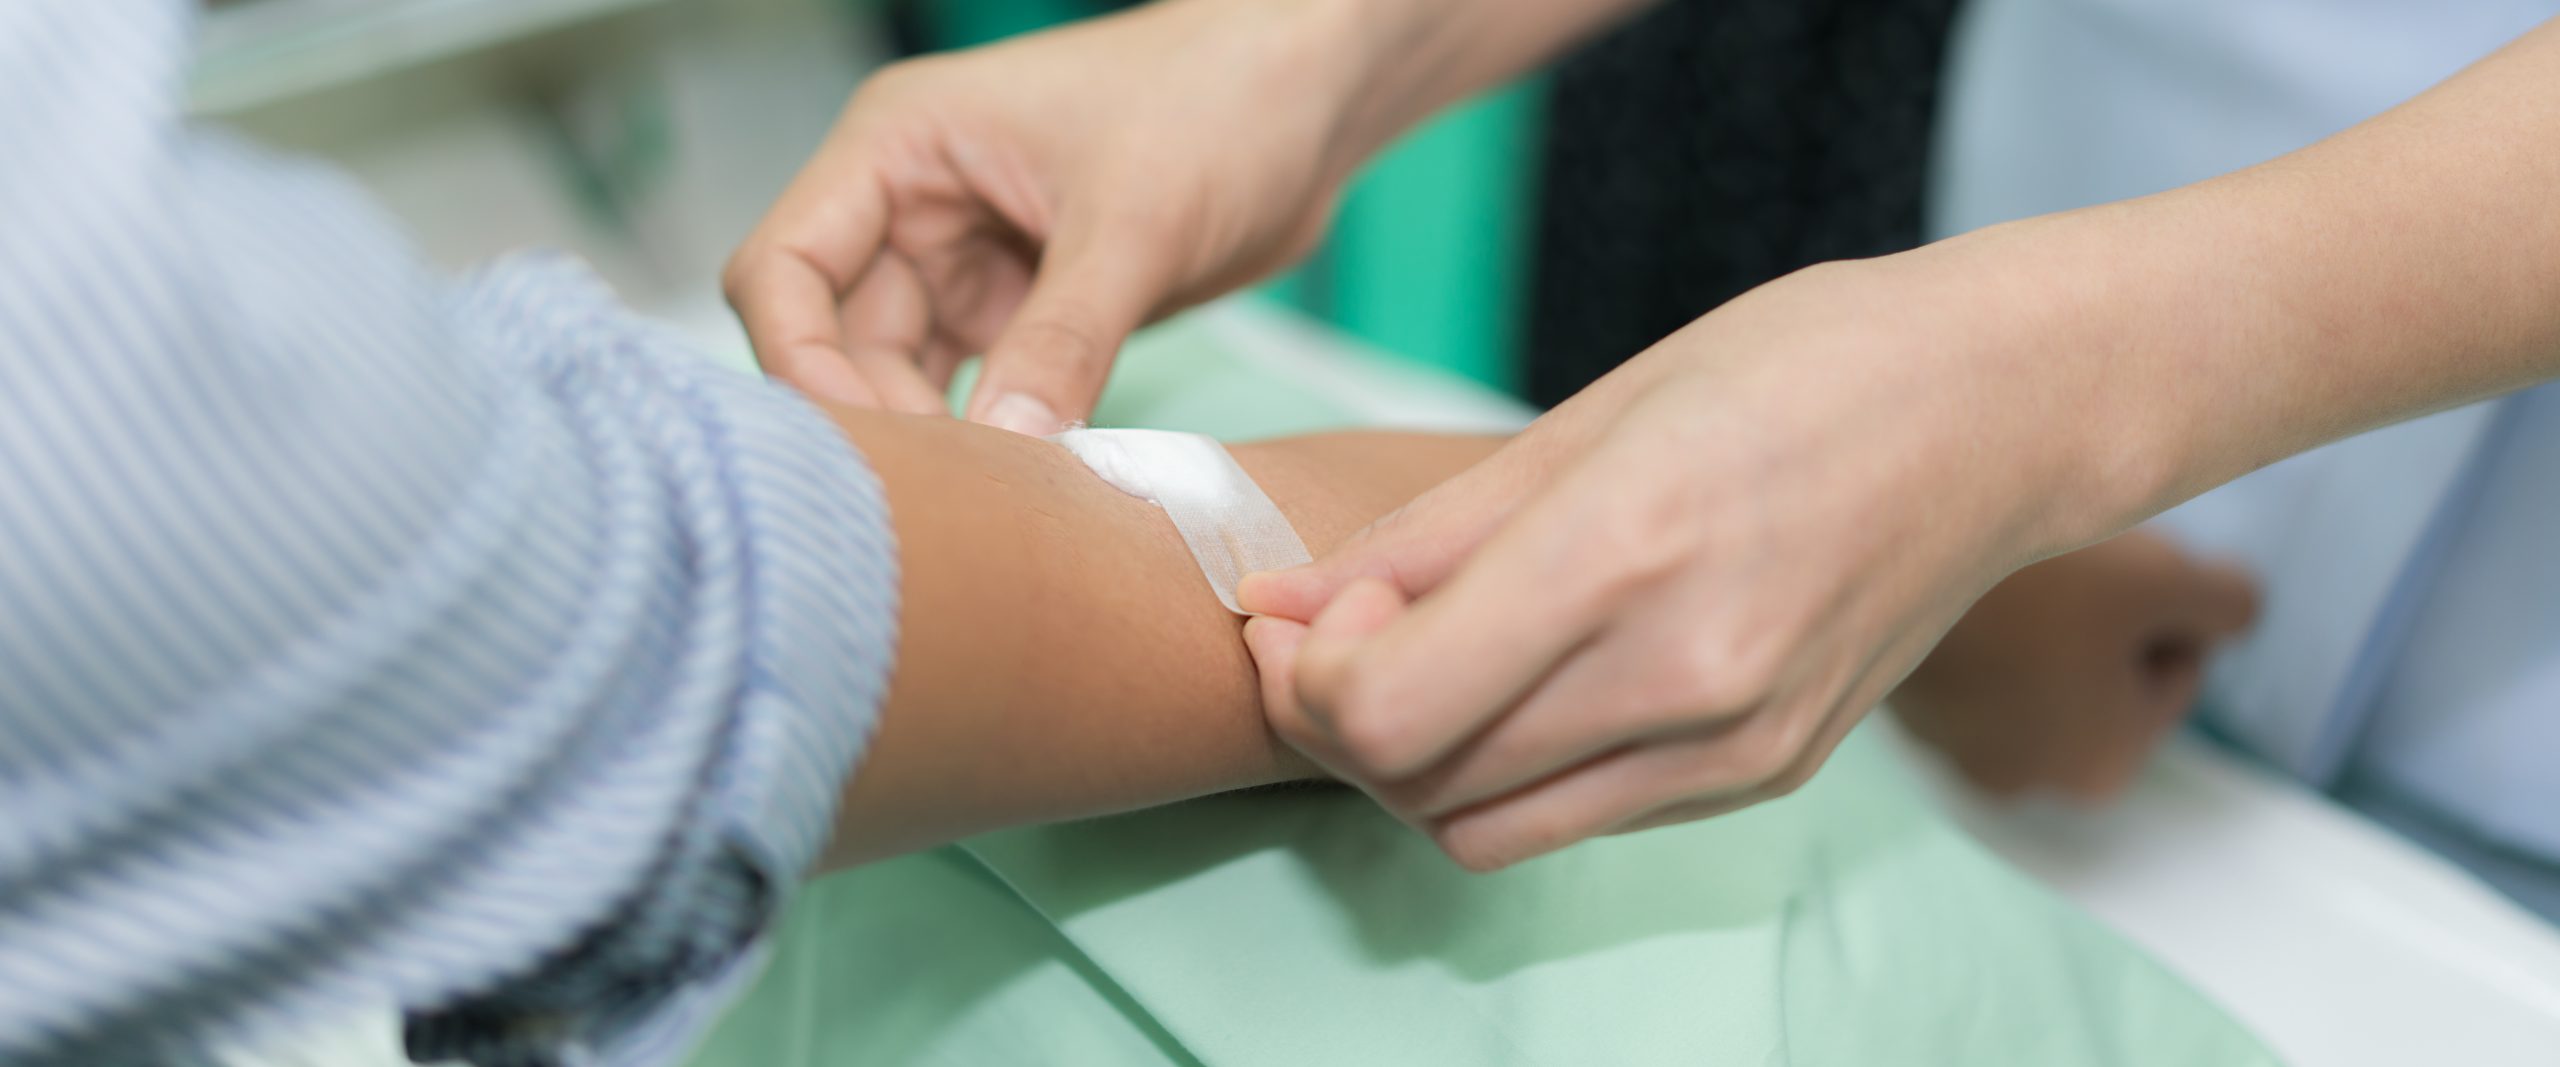 Nurse applying bandage on patient's hand after blood test in hospital.